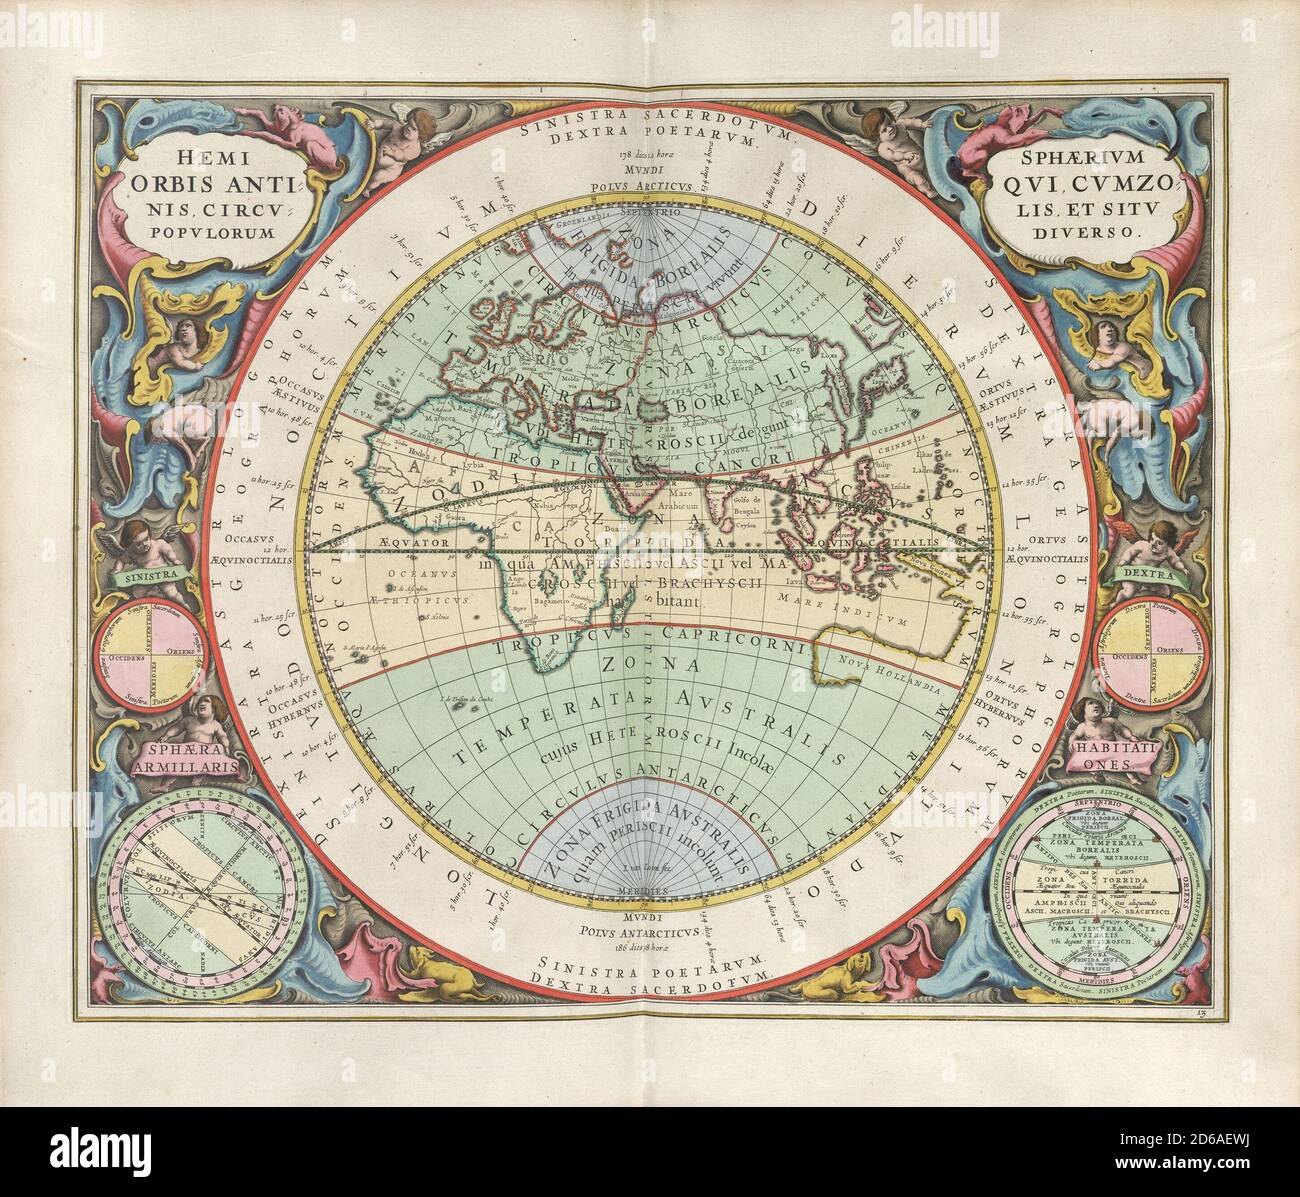 Title: The hemisphere of the Old World, with its (climate) zones, (meridian) circles and the dwelling places of the distinctive races. Engraved by Johannes van Loon. Engraving from Harmonia Macrocosmica Creator: Andreas Cellarius Date: c. 17th Medium: hand coloured engraving Location: The British Library Stock Photo